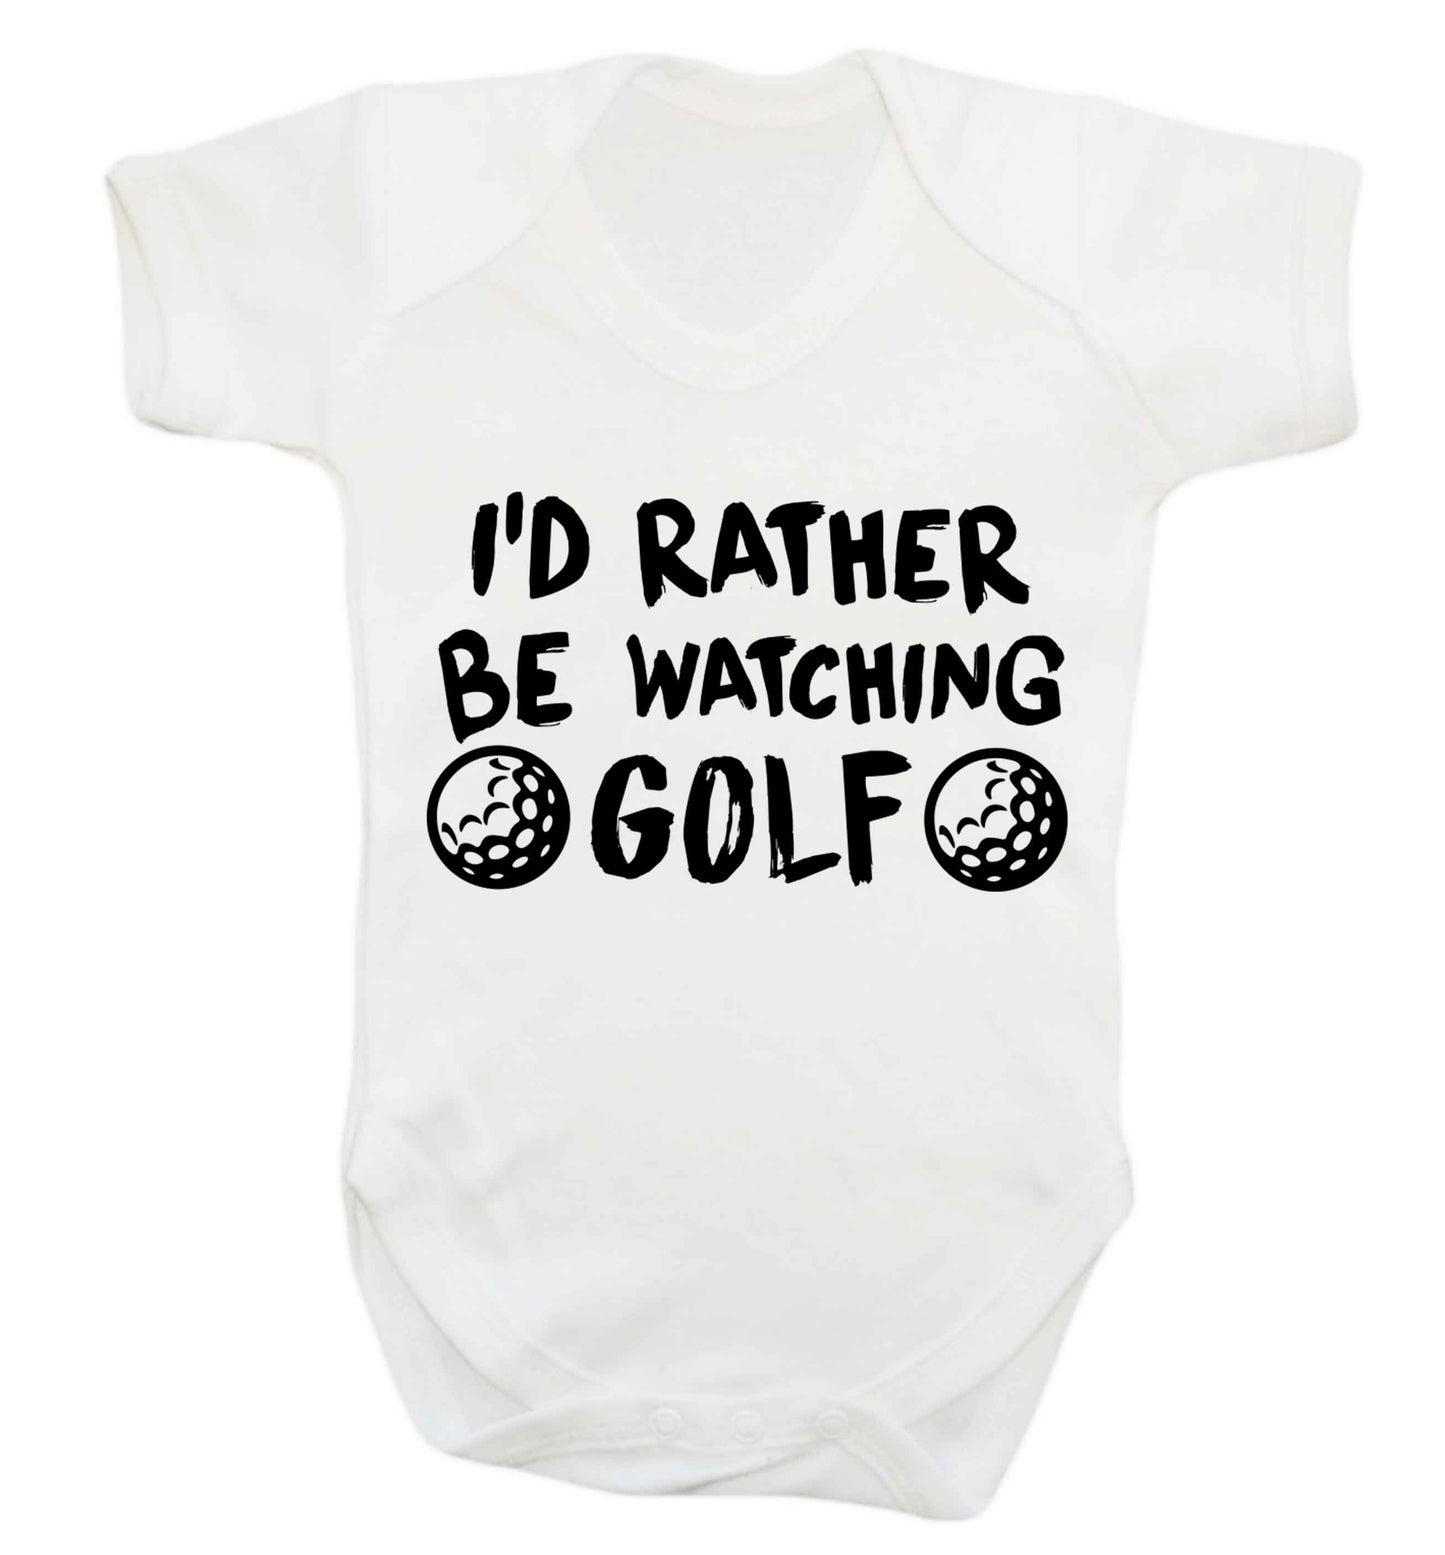 I'd rather be watching golf Baby Vest white 18-24 months